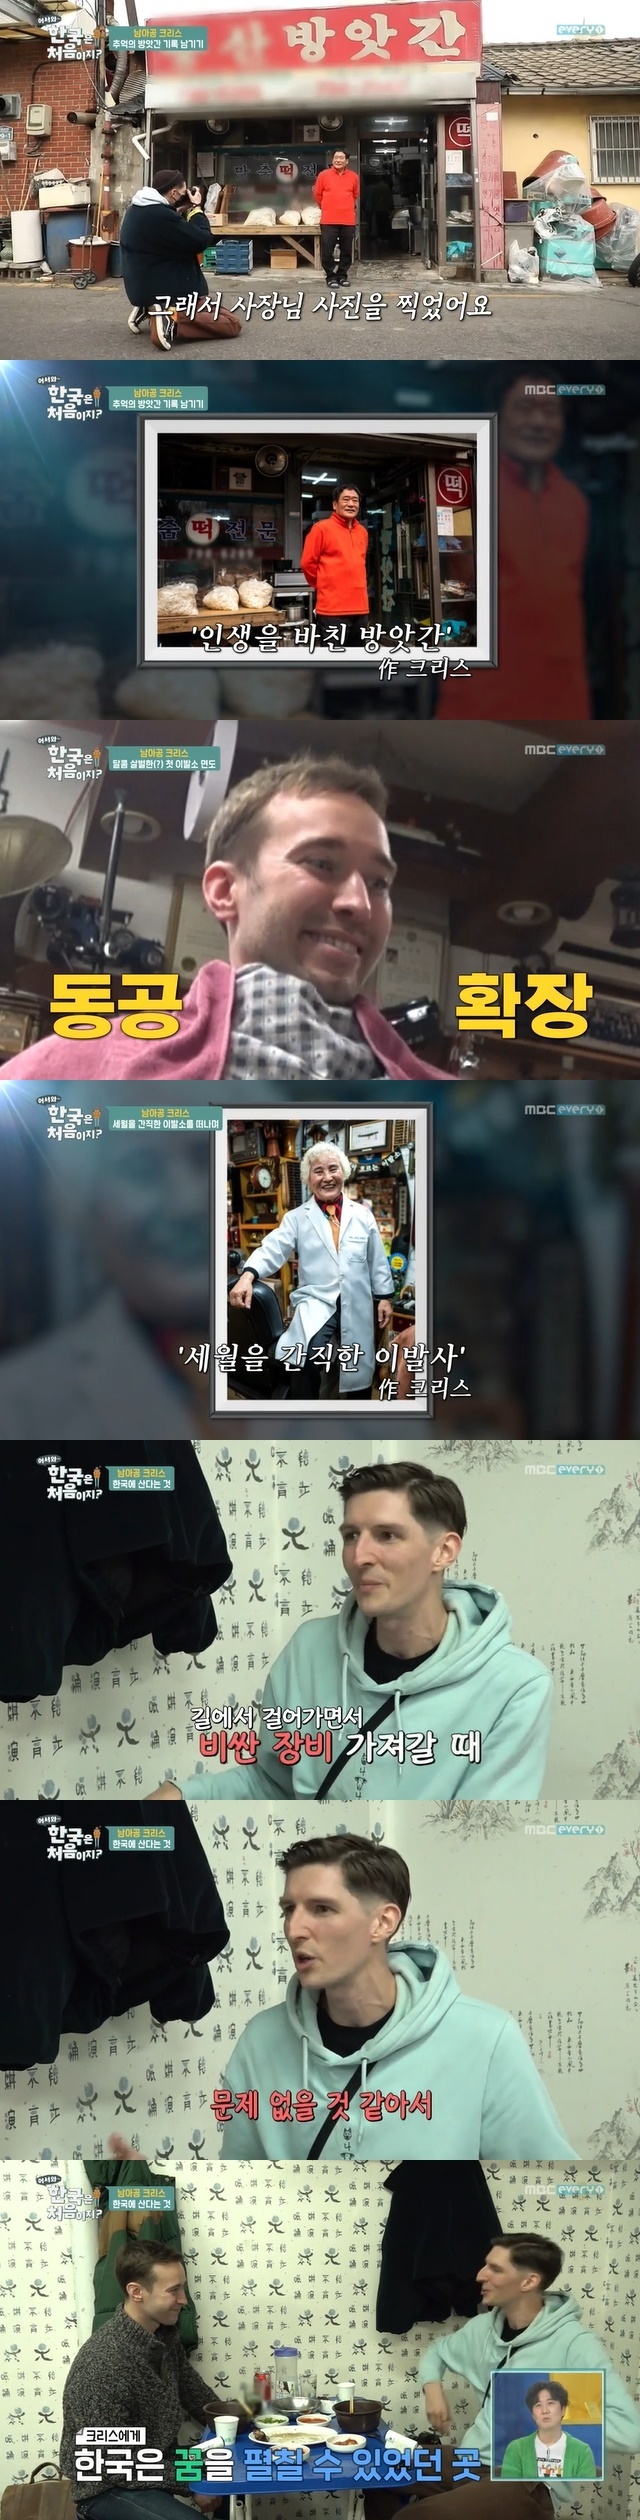 A South African photographer, Cristiano Ronaldo, has revealed his love for Korea professionally.MBC every1 entertainment Welcome, First Time in Korea?In the 236th episode, Koreana Sal, who was in the streets of Korea, was portrayed as Cristiano Ronaldo from South Africa in the 10th year.On this day, Cristiano Ronaldo took to the streets to record the forgotten and disappearing things in the rapid development of Korea.First, Cristiano Ronaldo took a picture of Model on the spot in search of a crossing that was not far from Seoul.In the photograph of Cristiano Ronaldo, the uncle waiting in front of the crossing, the driver on the motorcycle, the grandmother crossing the crossing, and the president of the old laundry began to put one by one.Jang Doyeon was a workable photo that said, I hope Model people will see our broadcast, with memories.Cristiano Ronaldos fellow and architect of Cristiano Ronaldo joined Kevin from the United States in the 12th year of Korea.The two men, with the permission of the boss as well as the outside, entered the 40-year-old mill and barber shop and began to contain the tradition of Korea in the store and the life of the boss.The bosses responded to the photo shoots, as well as touring the shops and telling their lives.In particular, the mill boss said, There were seven mills in Yongsan, but four were closed. Now there are three places left, but I do not know if I will keep them.It is hard because it is now down. The industry that devoted its life to the decline is in decline, which is Welcome, First Time in Korea?And two Korean MCs Oh Kyung-wan and Jang Doyeon left many thoughts.Cristiano Ronaldo and Kevin also experienced their heads and shavings at barber shops such as a 1930s dryer made in an easy-to-see period and a museum full of briquettes made in the 1940s.In this process, Kevin laughed at the appearance of a razor, expanding his pupils and shaking, but they were reborn as visuals that were kept in a strange barber shop these days and became clear.Do Kyoung-wan and Jang Doyeon praised these two people, saying, I thought (the president) was mixing kimchi, but it was also a professional.Finally, Cristiano Ronaldo, Kevin, was led by a delicious smell and found a 50-year-old Norfo pork ribs.Cristiano Ronaldo, who enjoyed eating a much more delicious meal than he thought, soon asked Kevin about his 12-year-old Korean.Kevin said that if it was good for Feelings to travel in the past, now it is Feelings like home, so Korea is good.Cristiano Ronaldo then also said, I like buying Korea too, because I dont think theres going to be a problem when I walk on the road and take expensive (camera) equipment.It was good to be able to carry an expensive camera to the fullest. Do Kyoung-wan felt proud as a Korean, saying, What is good for security.There are so many opportunities, if you want to do something, you can find someone you want to do and you can do it together, in Korea, said Cristiano Ronaldo.Do Kyoung-wan was delighted that Jang Doyeon was also proud while he was saying Korea is a country where someone can dream.Cristiano Ronaldo, who finished his meal, left a picture of the boss and wife at the request of the pig ribs boss.Since then, Cristiano Ronaldo has said: Korea is developing fast, so its changing a lot, there are good things and bad things.Im happy Feelings, and I dont think anyone else will see it in the future. I can save it on camera.I will shoot every day if possible in the future. 